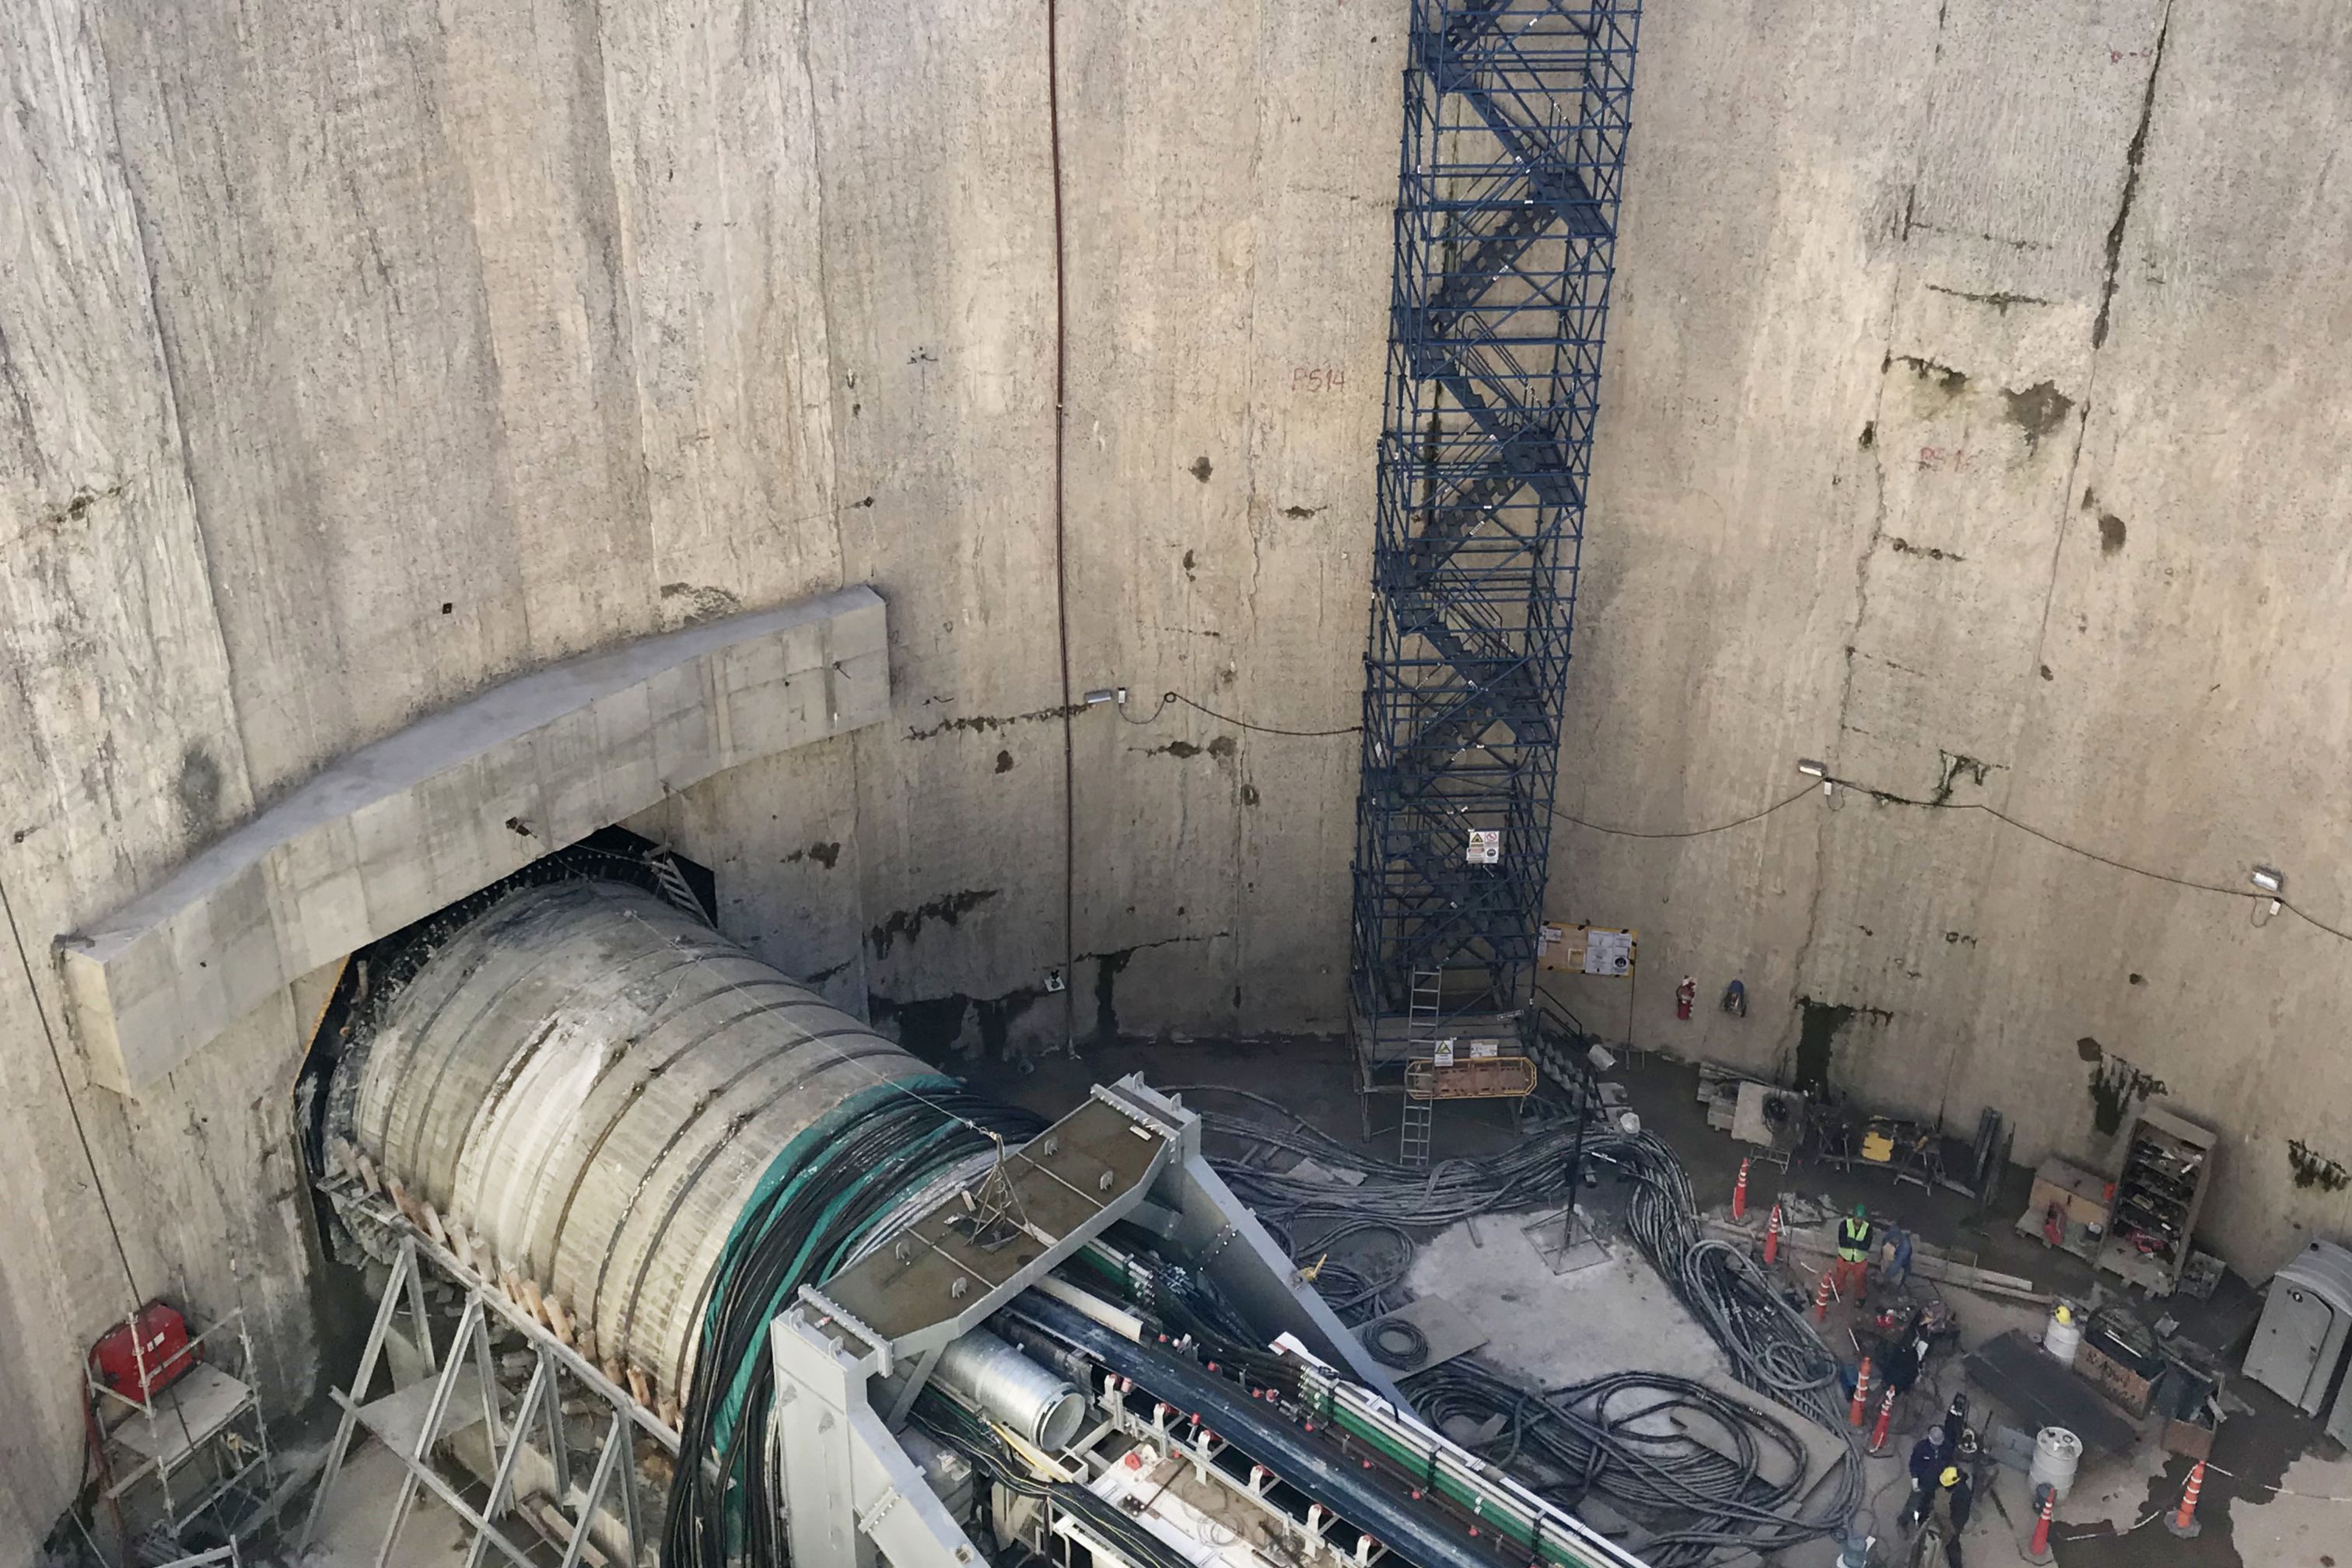 Excavating the  Arroyo - Vega tunnel in Argentina with TBM